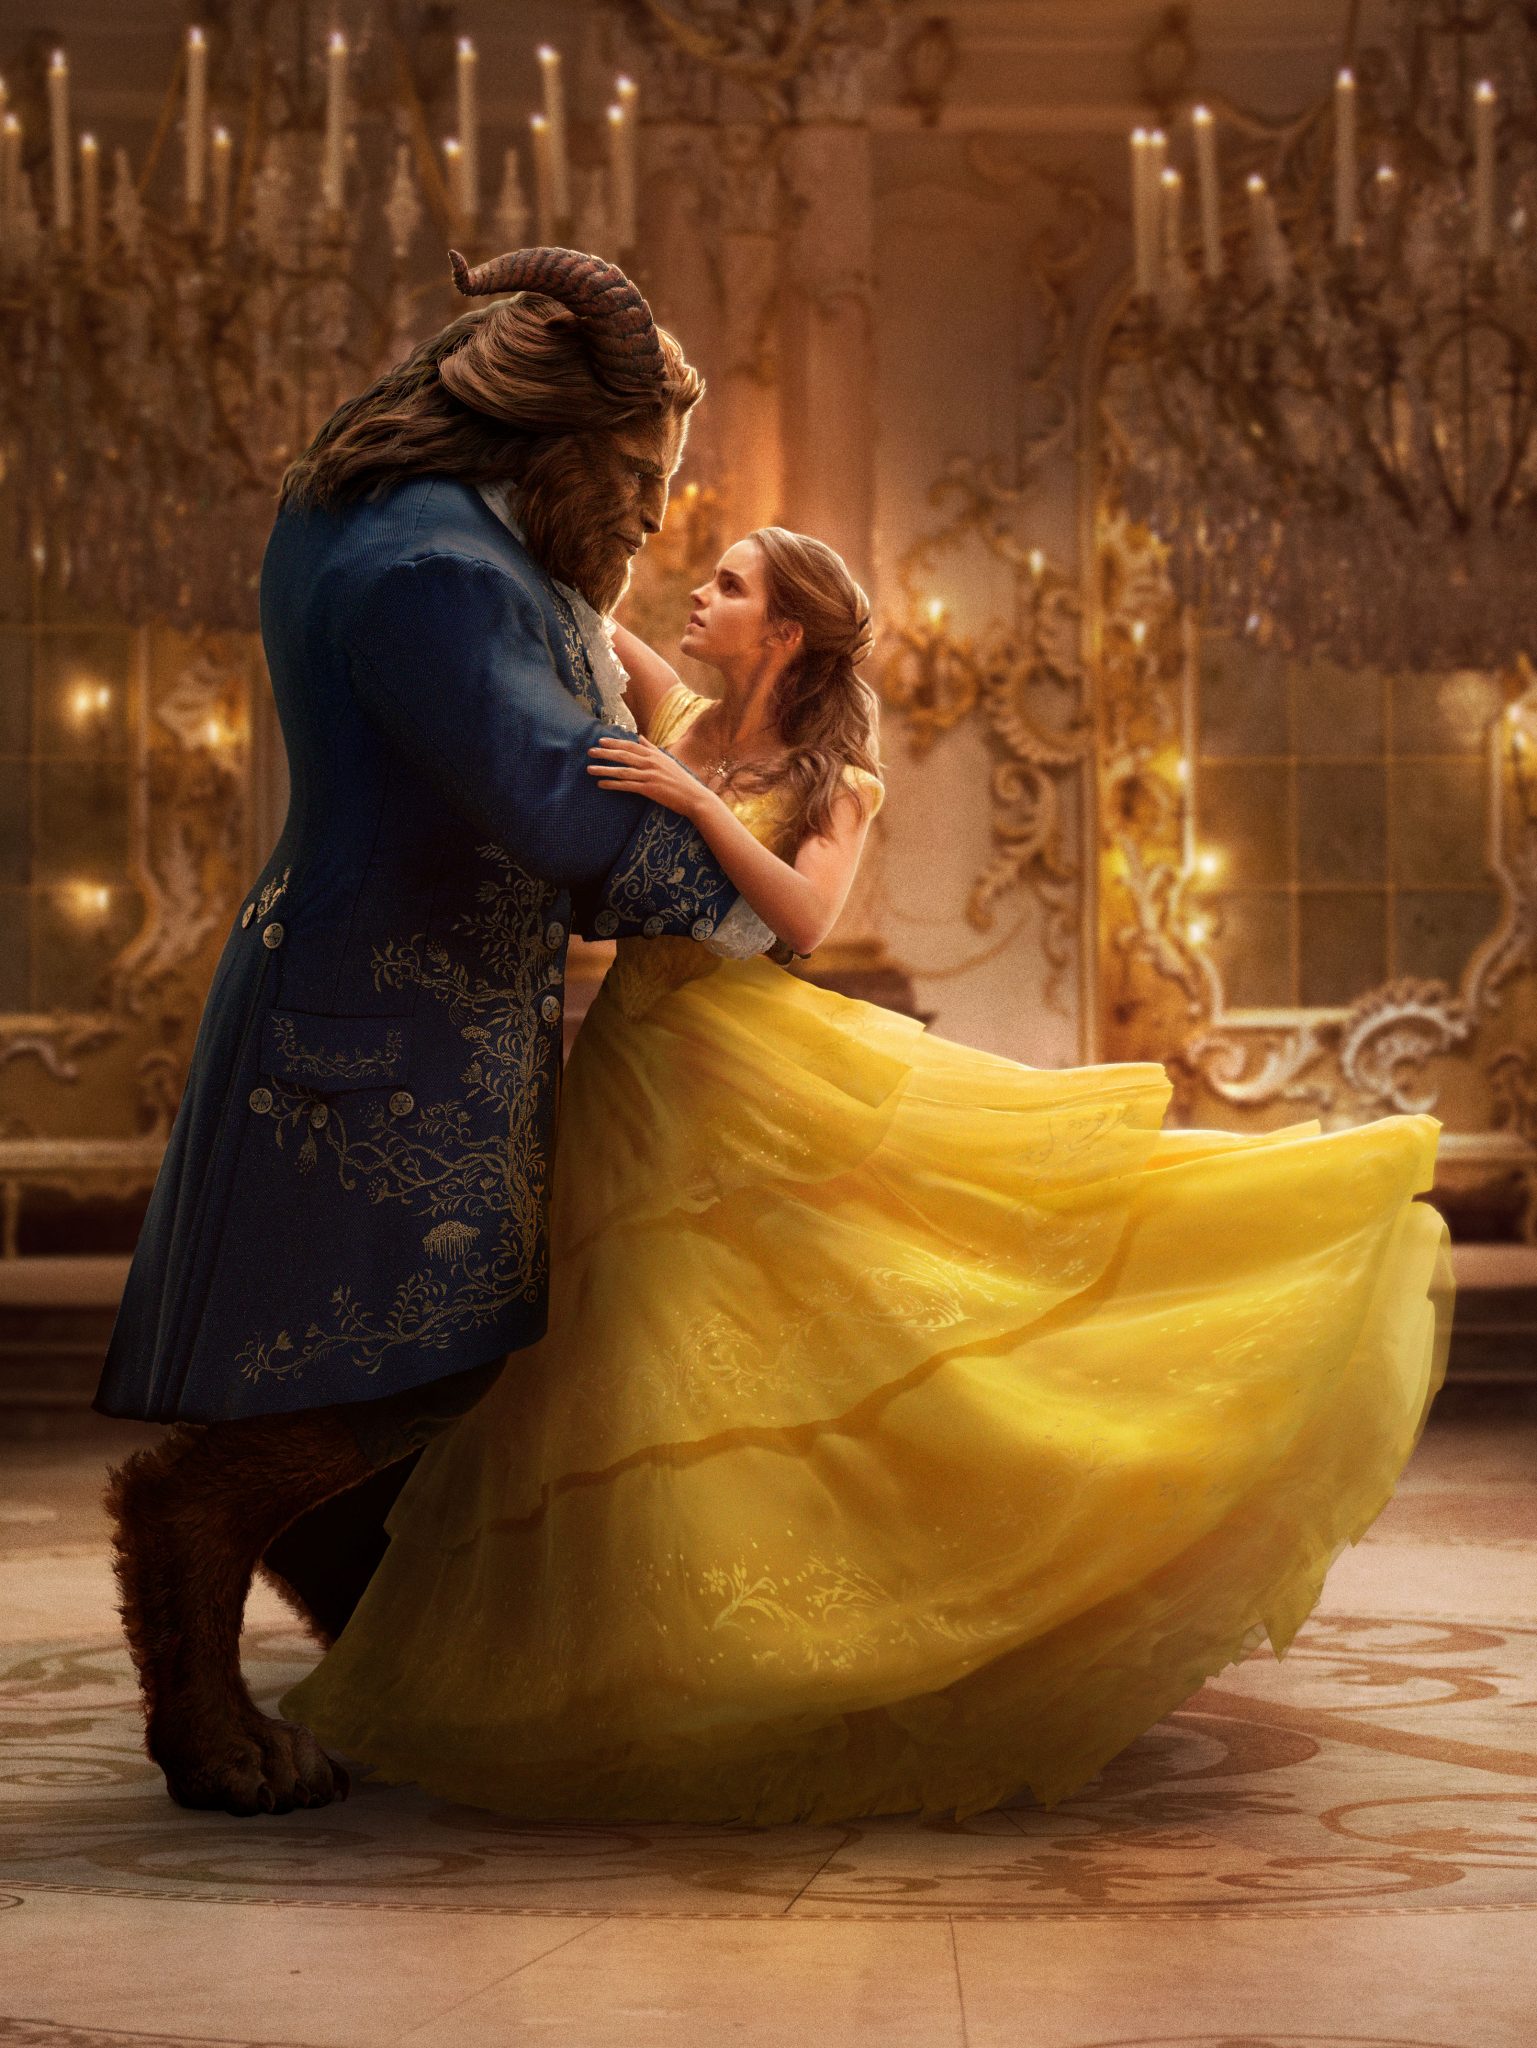 Magical New Images Arrive from Disney’s Live-Action Beauty and the Beast